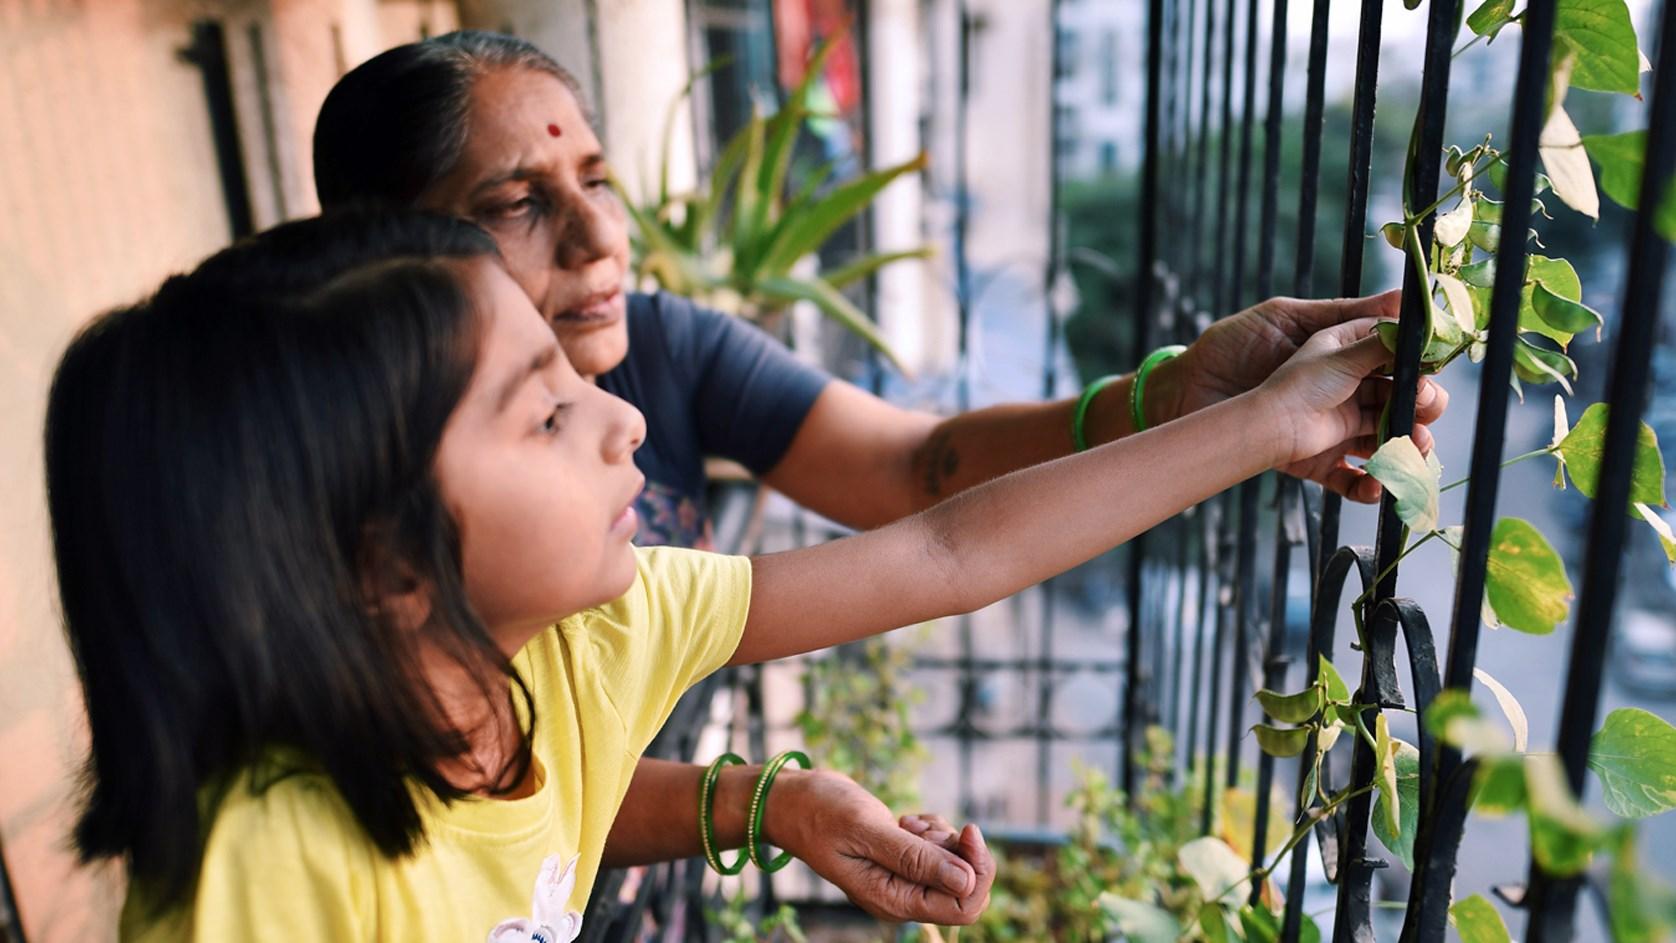 Child and older relative growing plants on a balcony